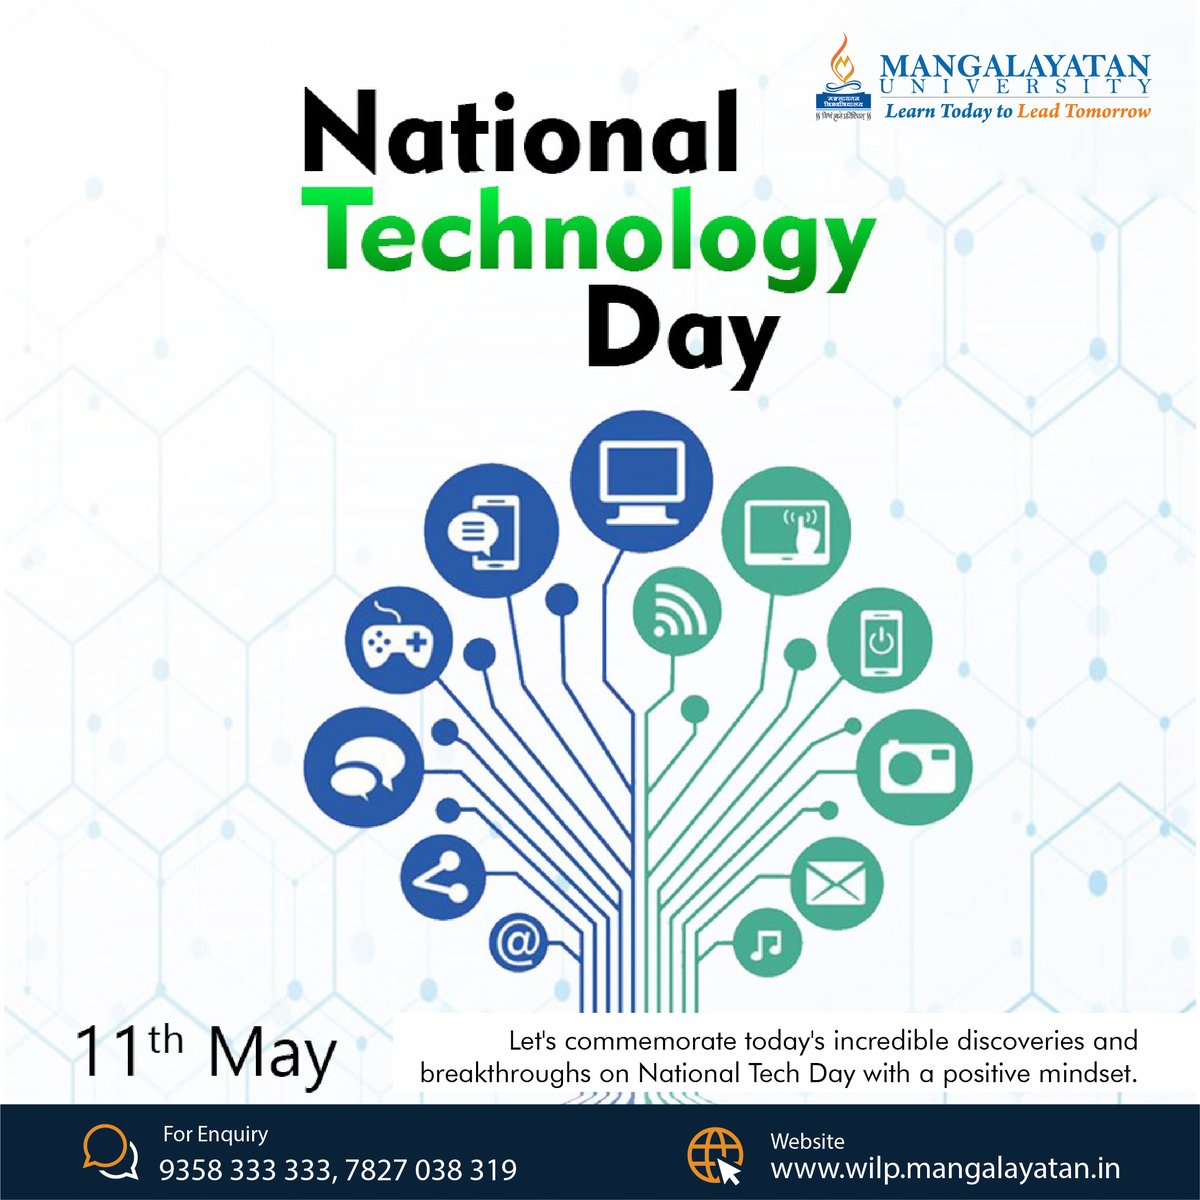 National Technology Day is a reminder of the power of technology to change the world. Let us use it to create a brighter future for all. Happy National Technology Day. 🇮🇳🚀
#NationalTechnologyDay #ScienceForSociety #ScienceAndInnovation #ScienceEducation #MangalayatanUniversity